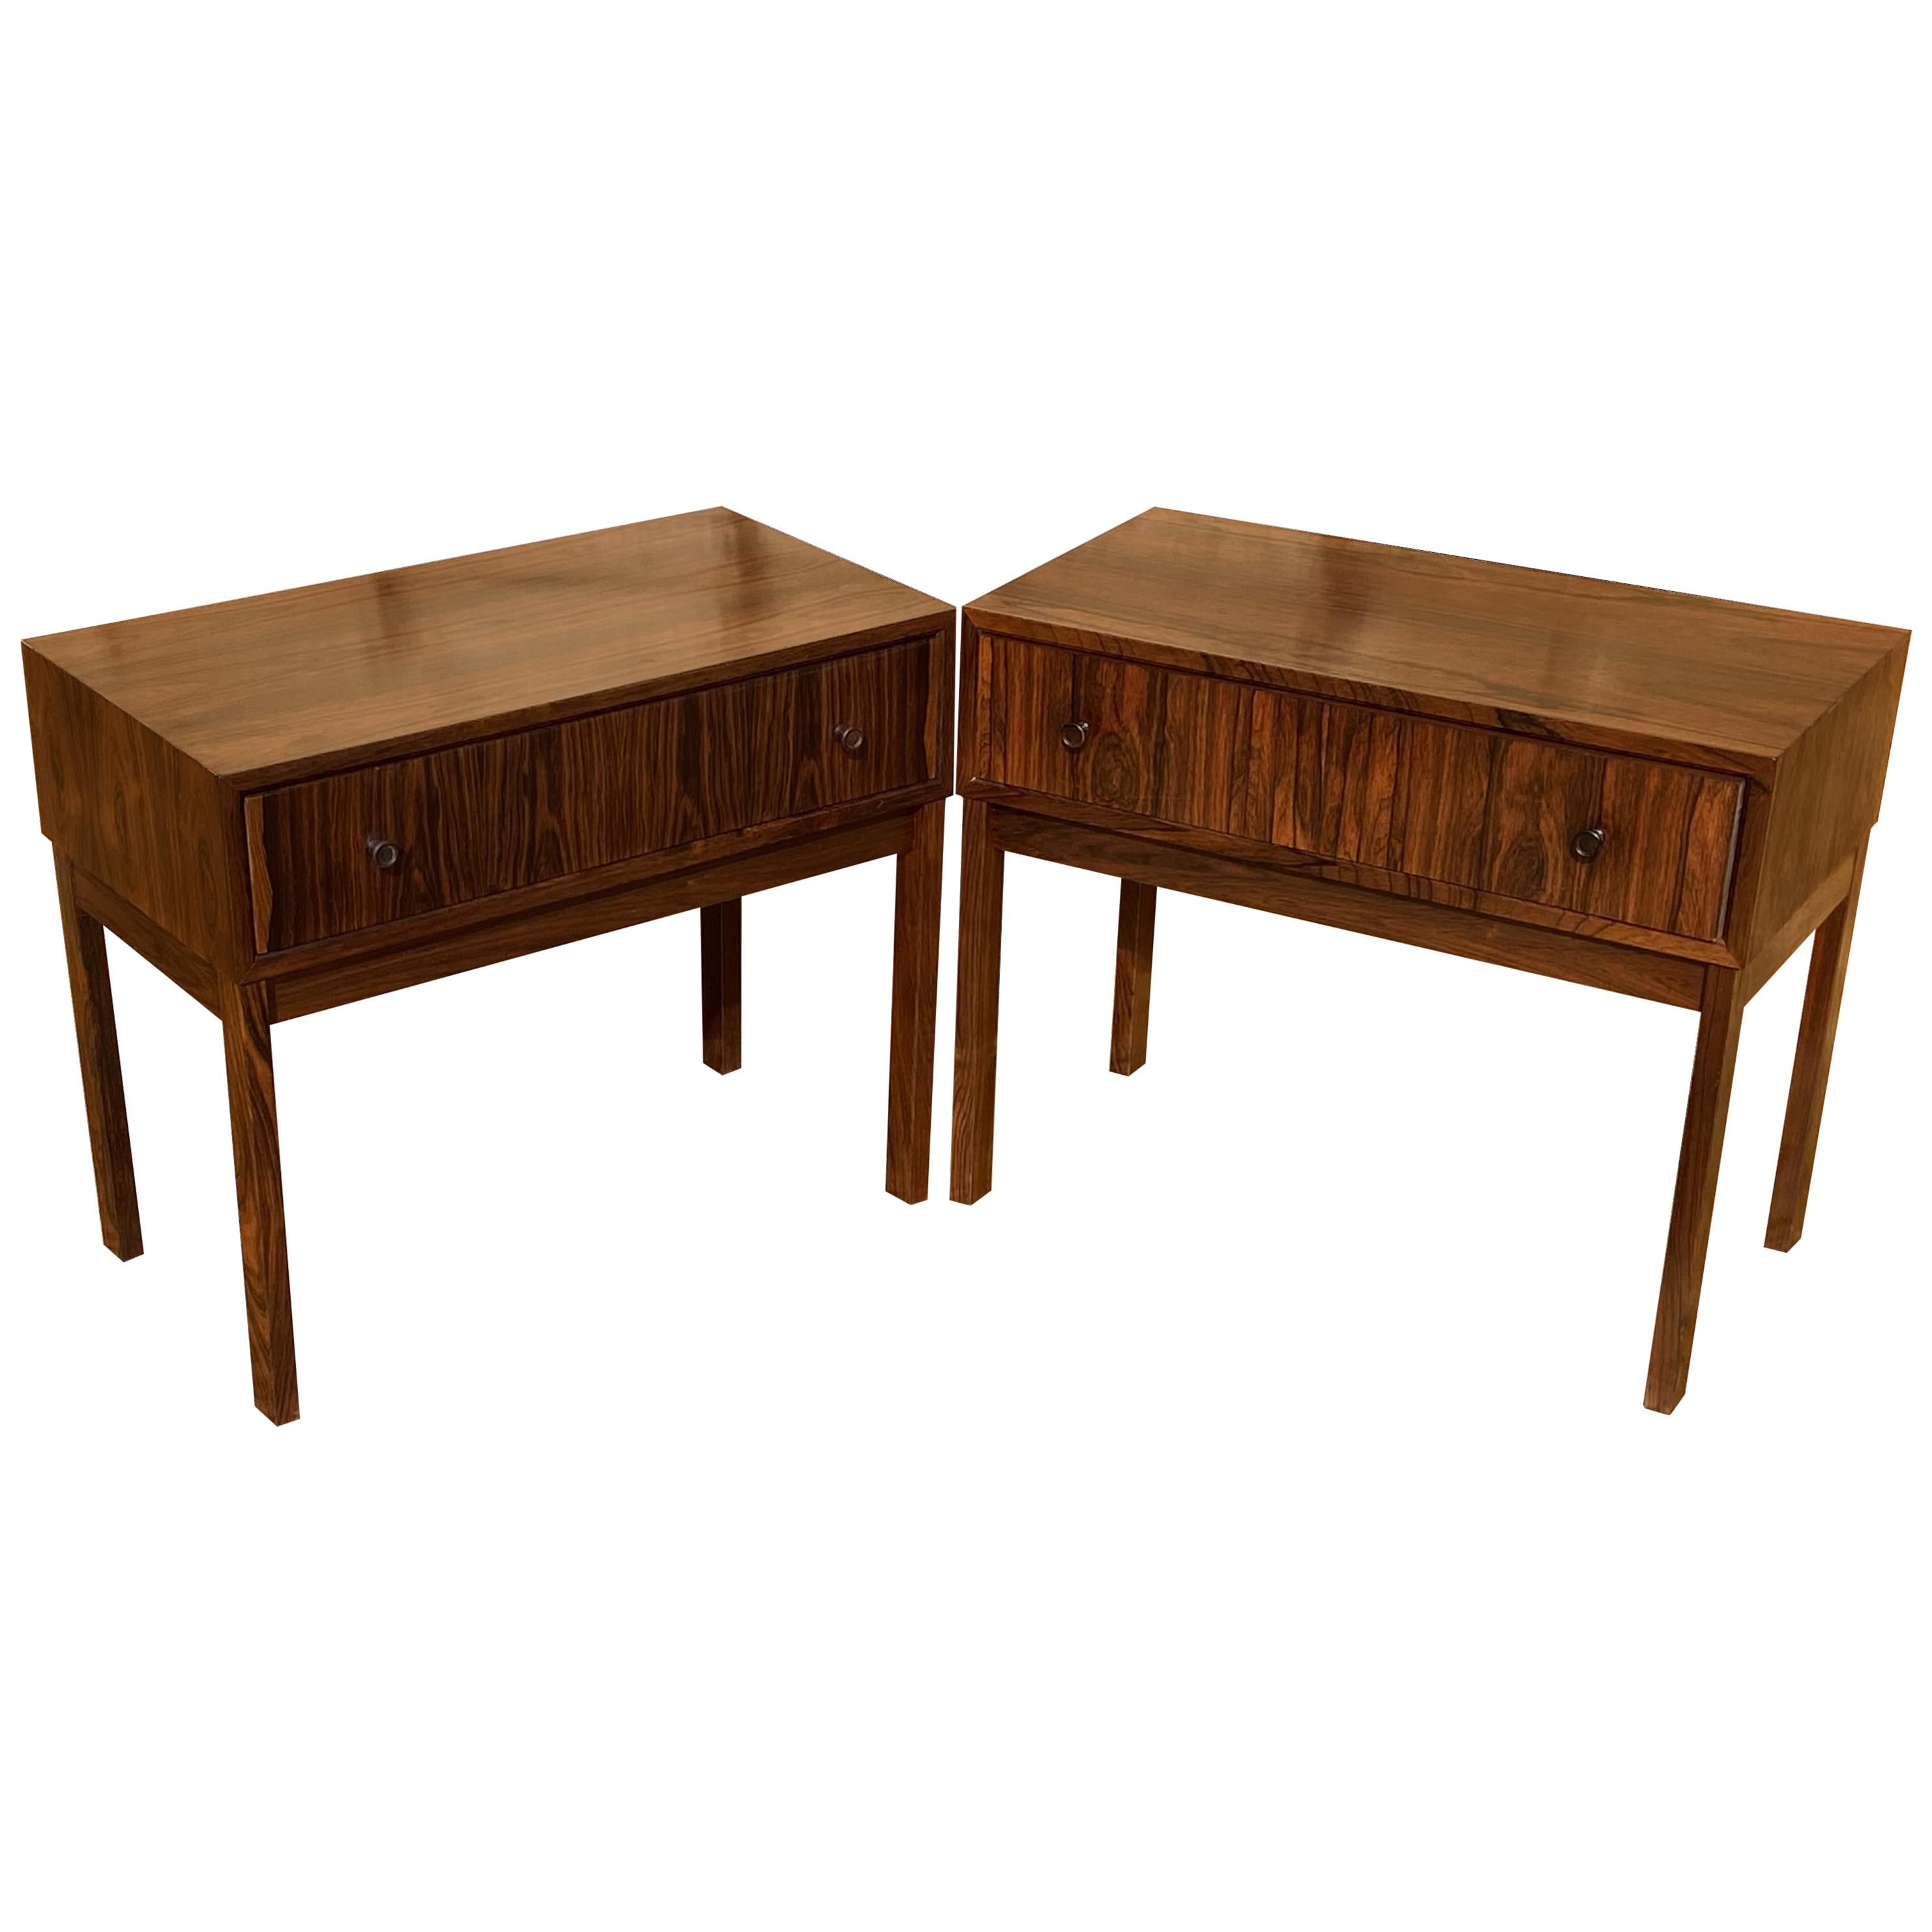 Pair of Midcentury Santos Rosewood Bedside Tables with Single Drawers